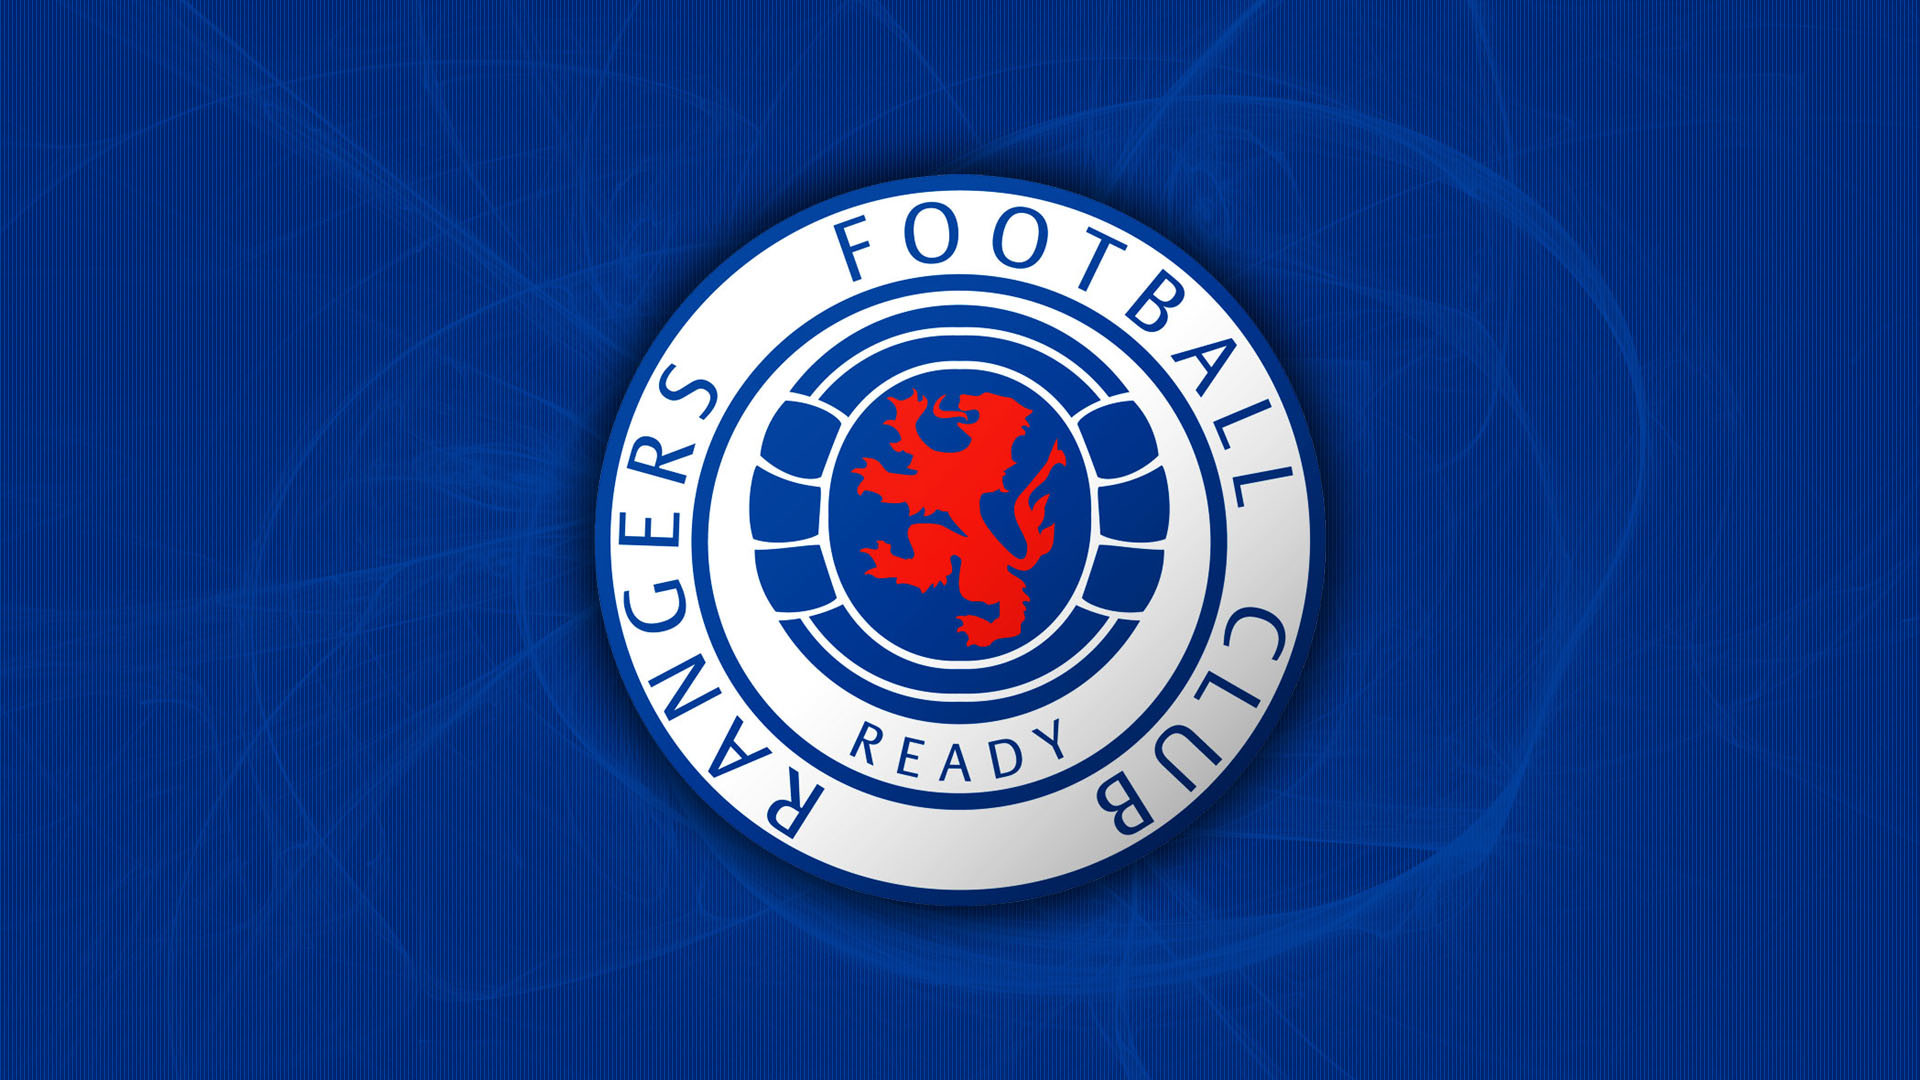 Rangers Fc Wallpapers (62+ images)